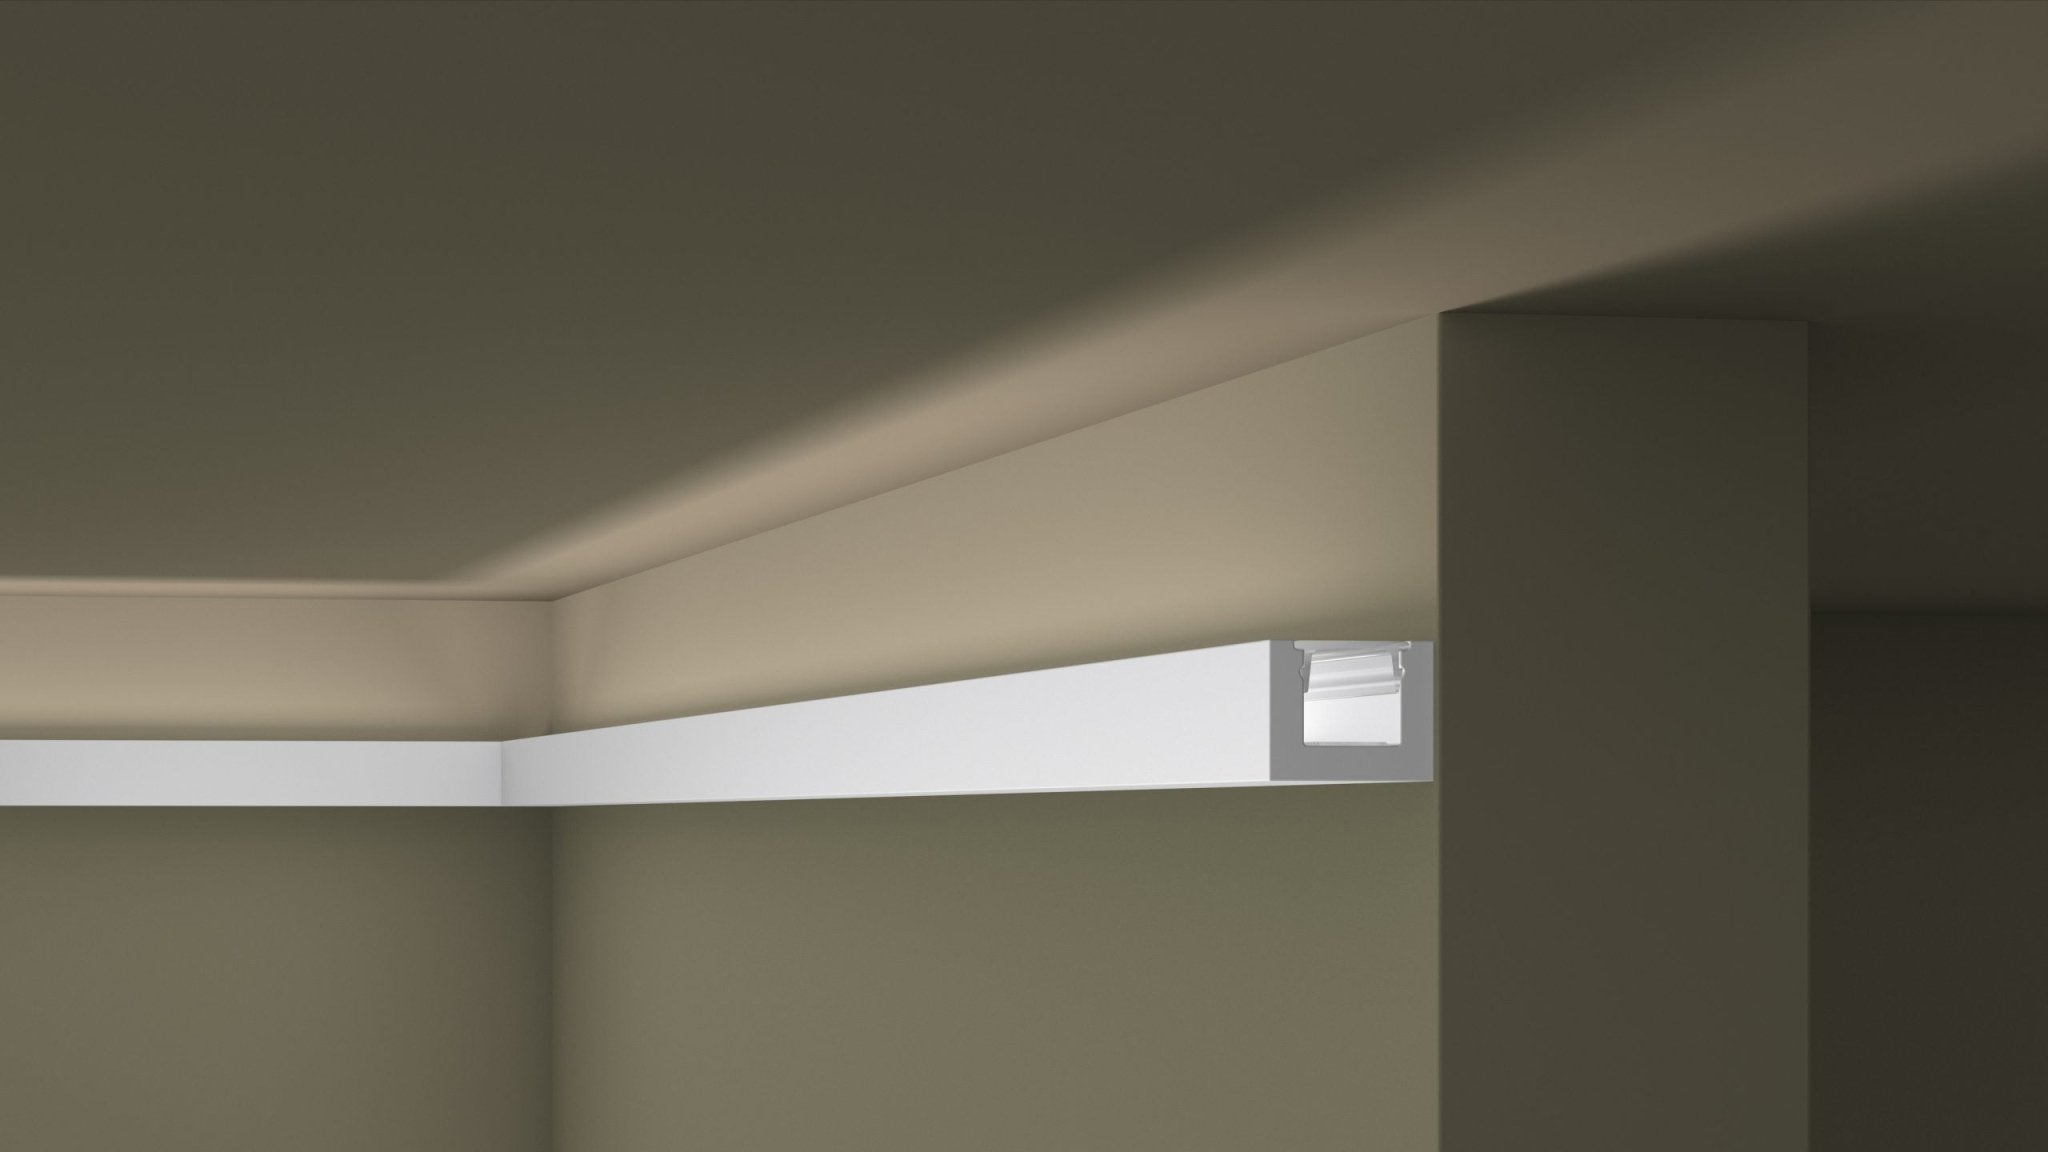 IL12 ARSTYL 2M COVING LIGHTING SOLUTION - Covings | DecorMania